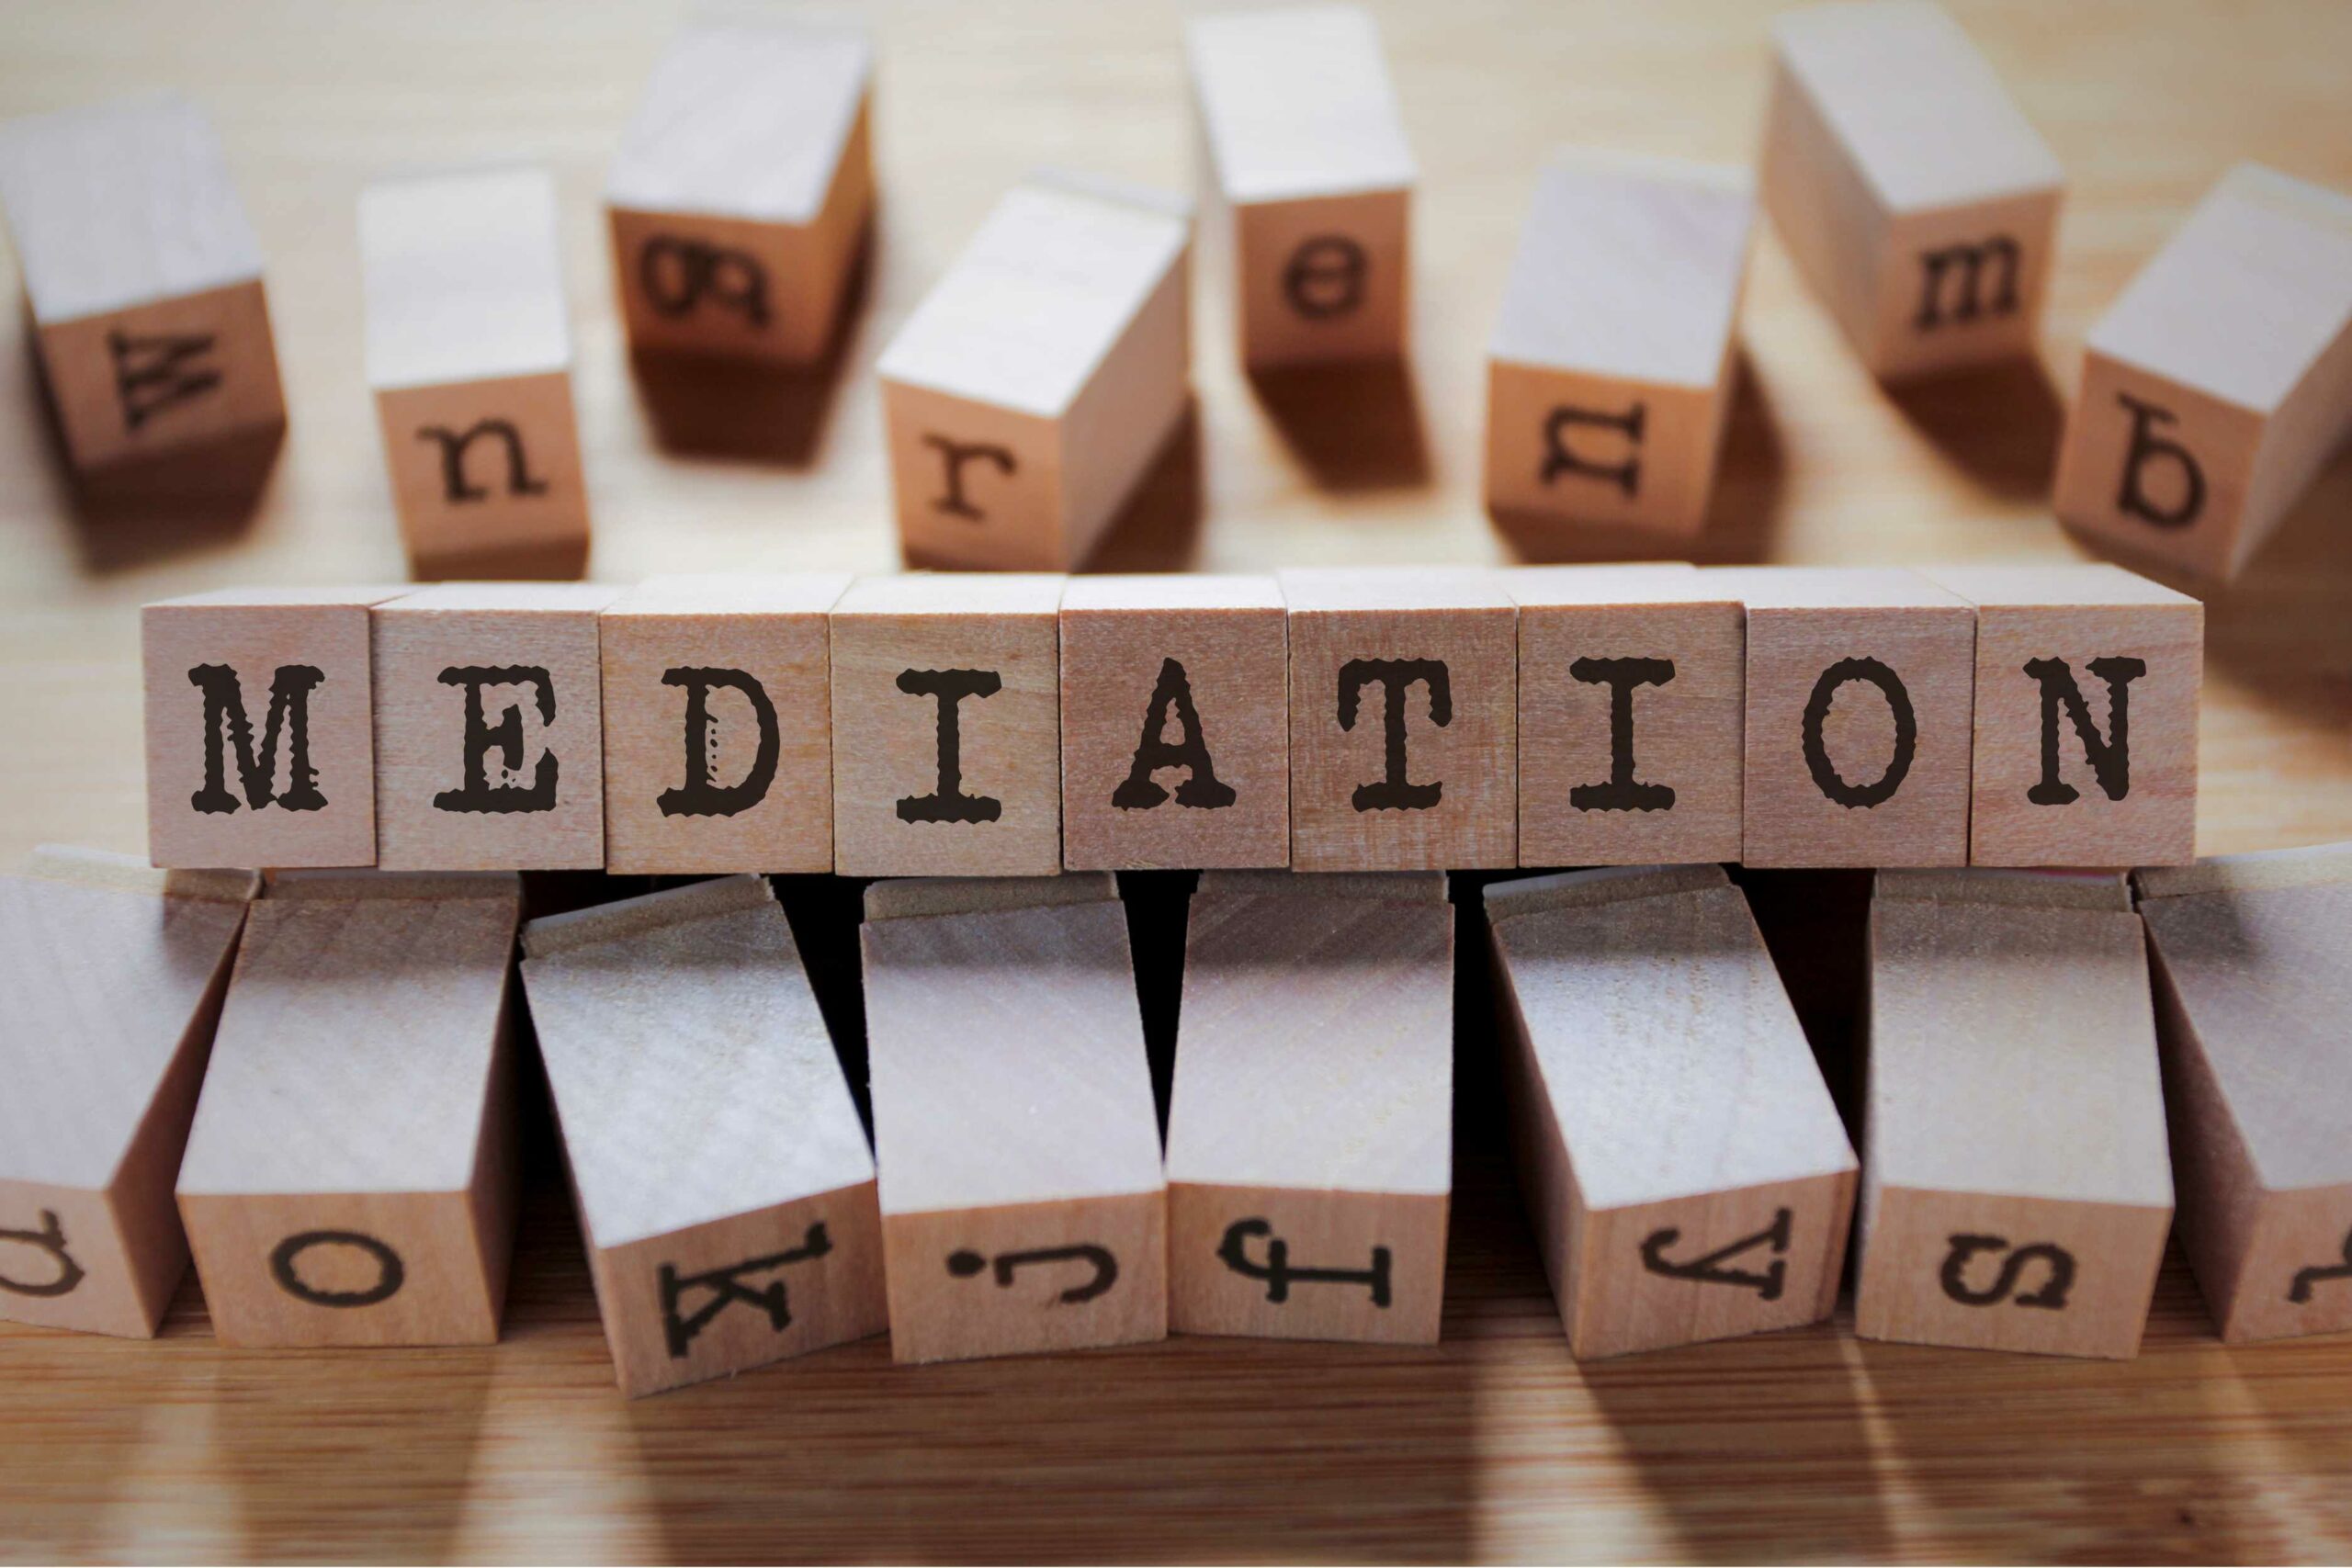 This image shows wooden blocks with black font lined together to spell the word 'Mediation'. Family Dispute Resolution is a type of mediation.